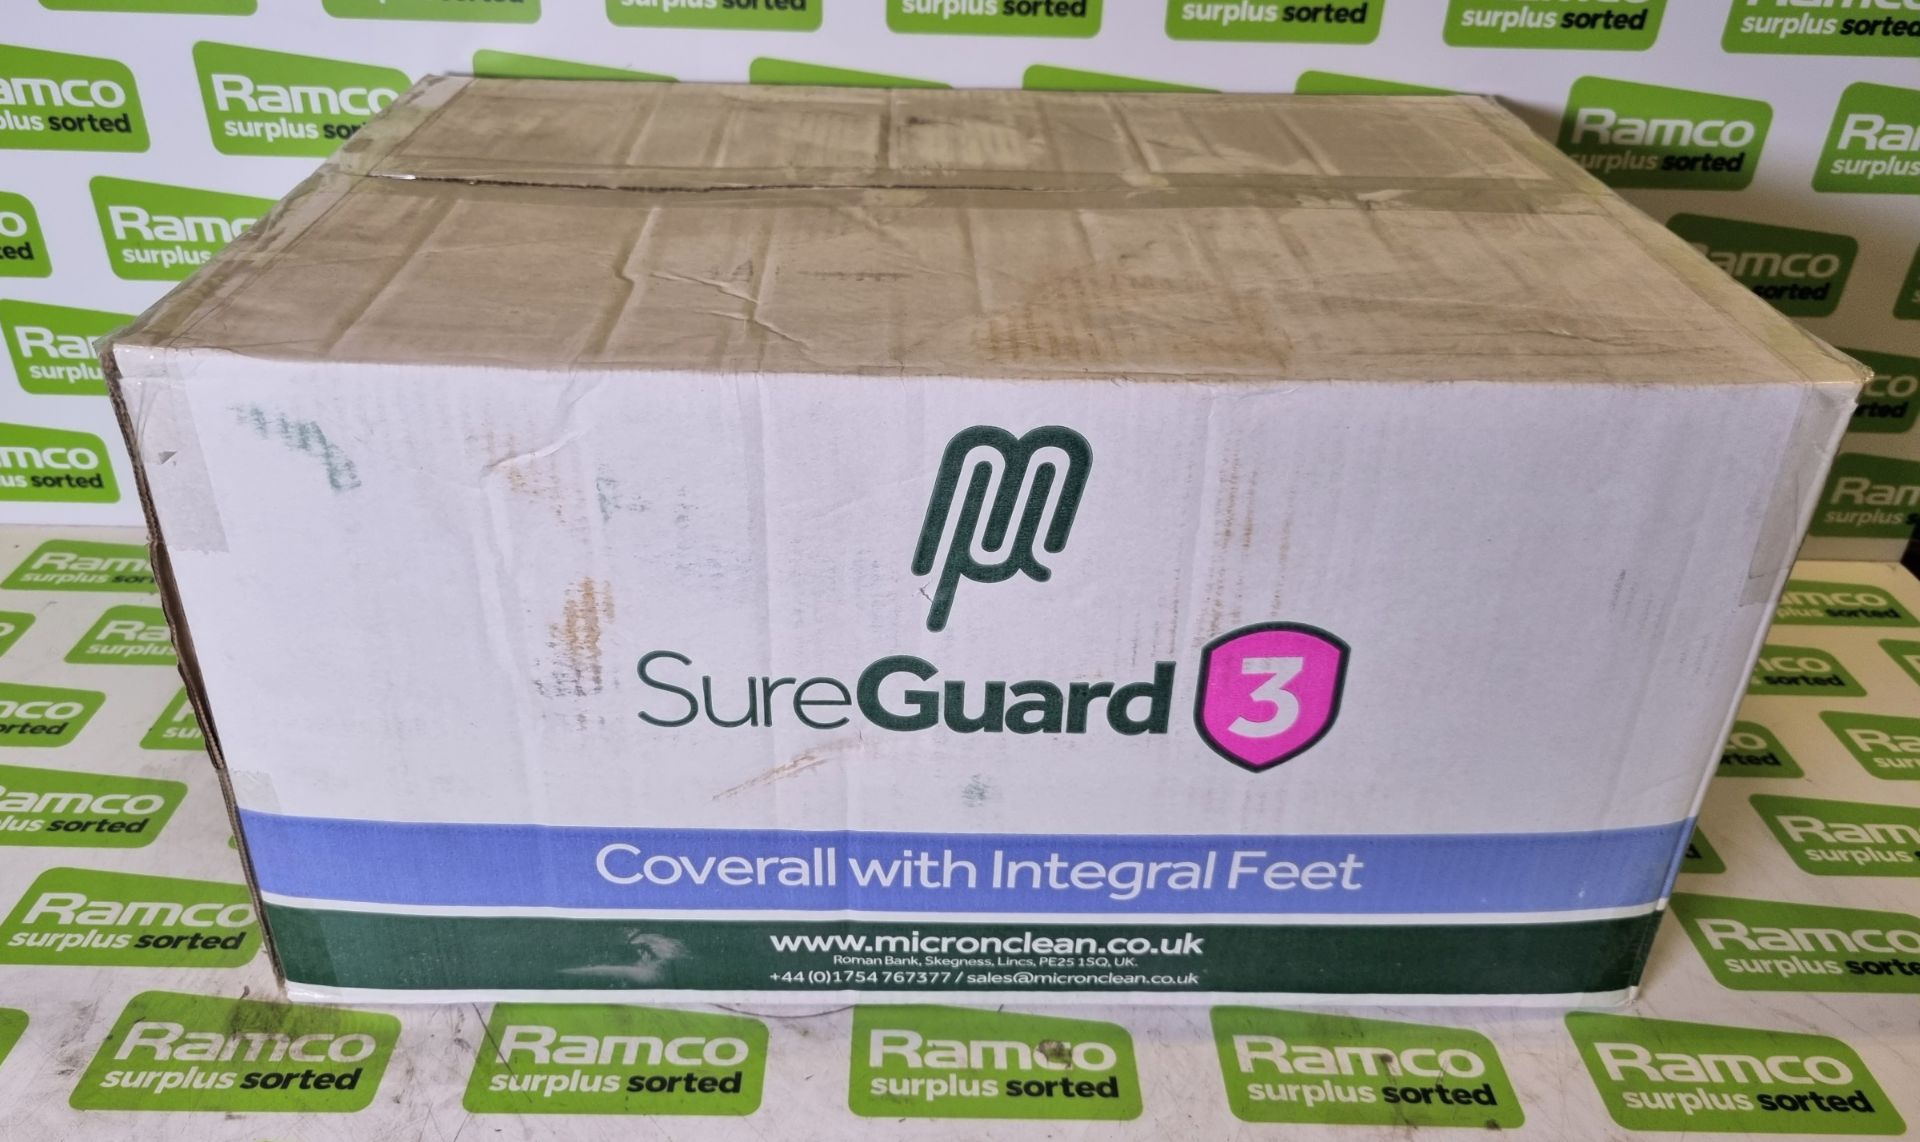 MicroClean SureGuard 3 - size Medium coverall with integral feet - 25 units per box - Image 2 of 3